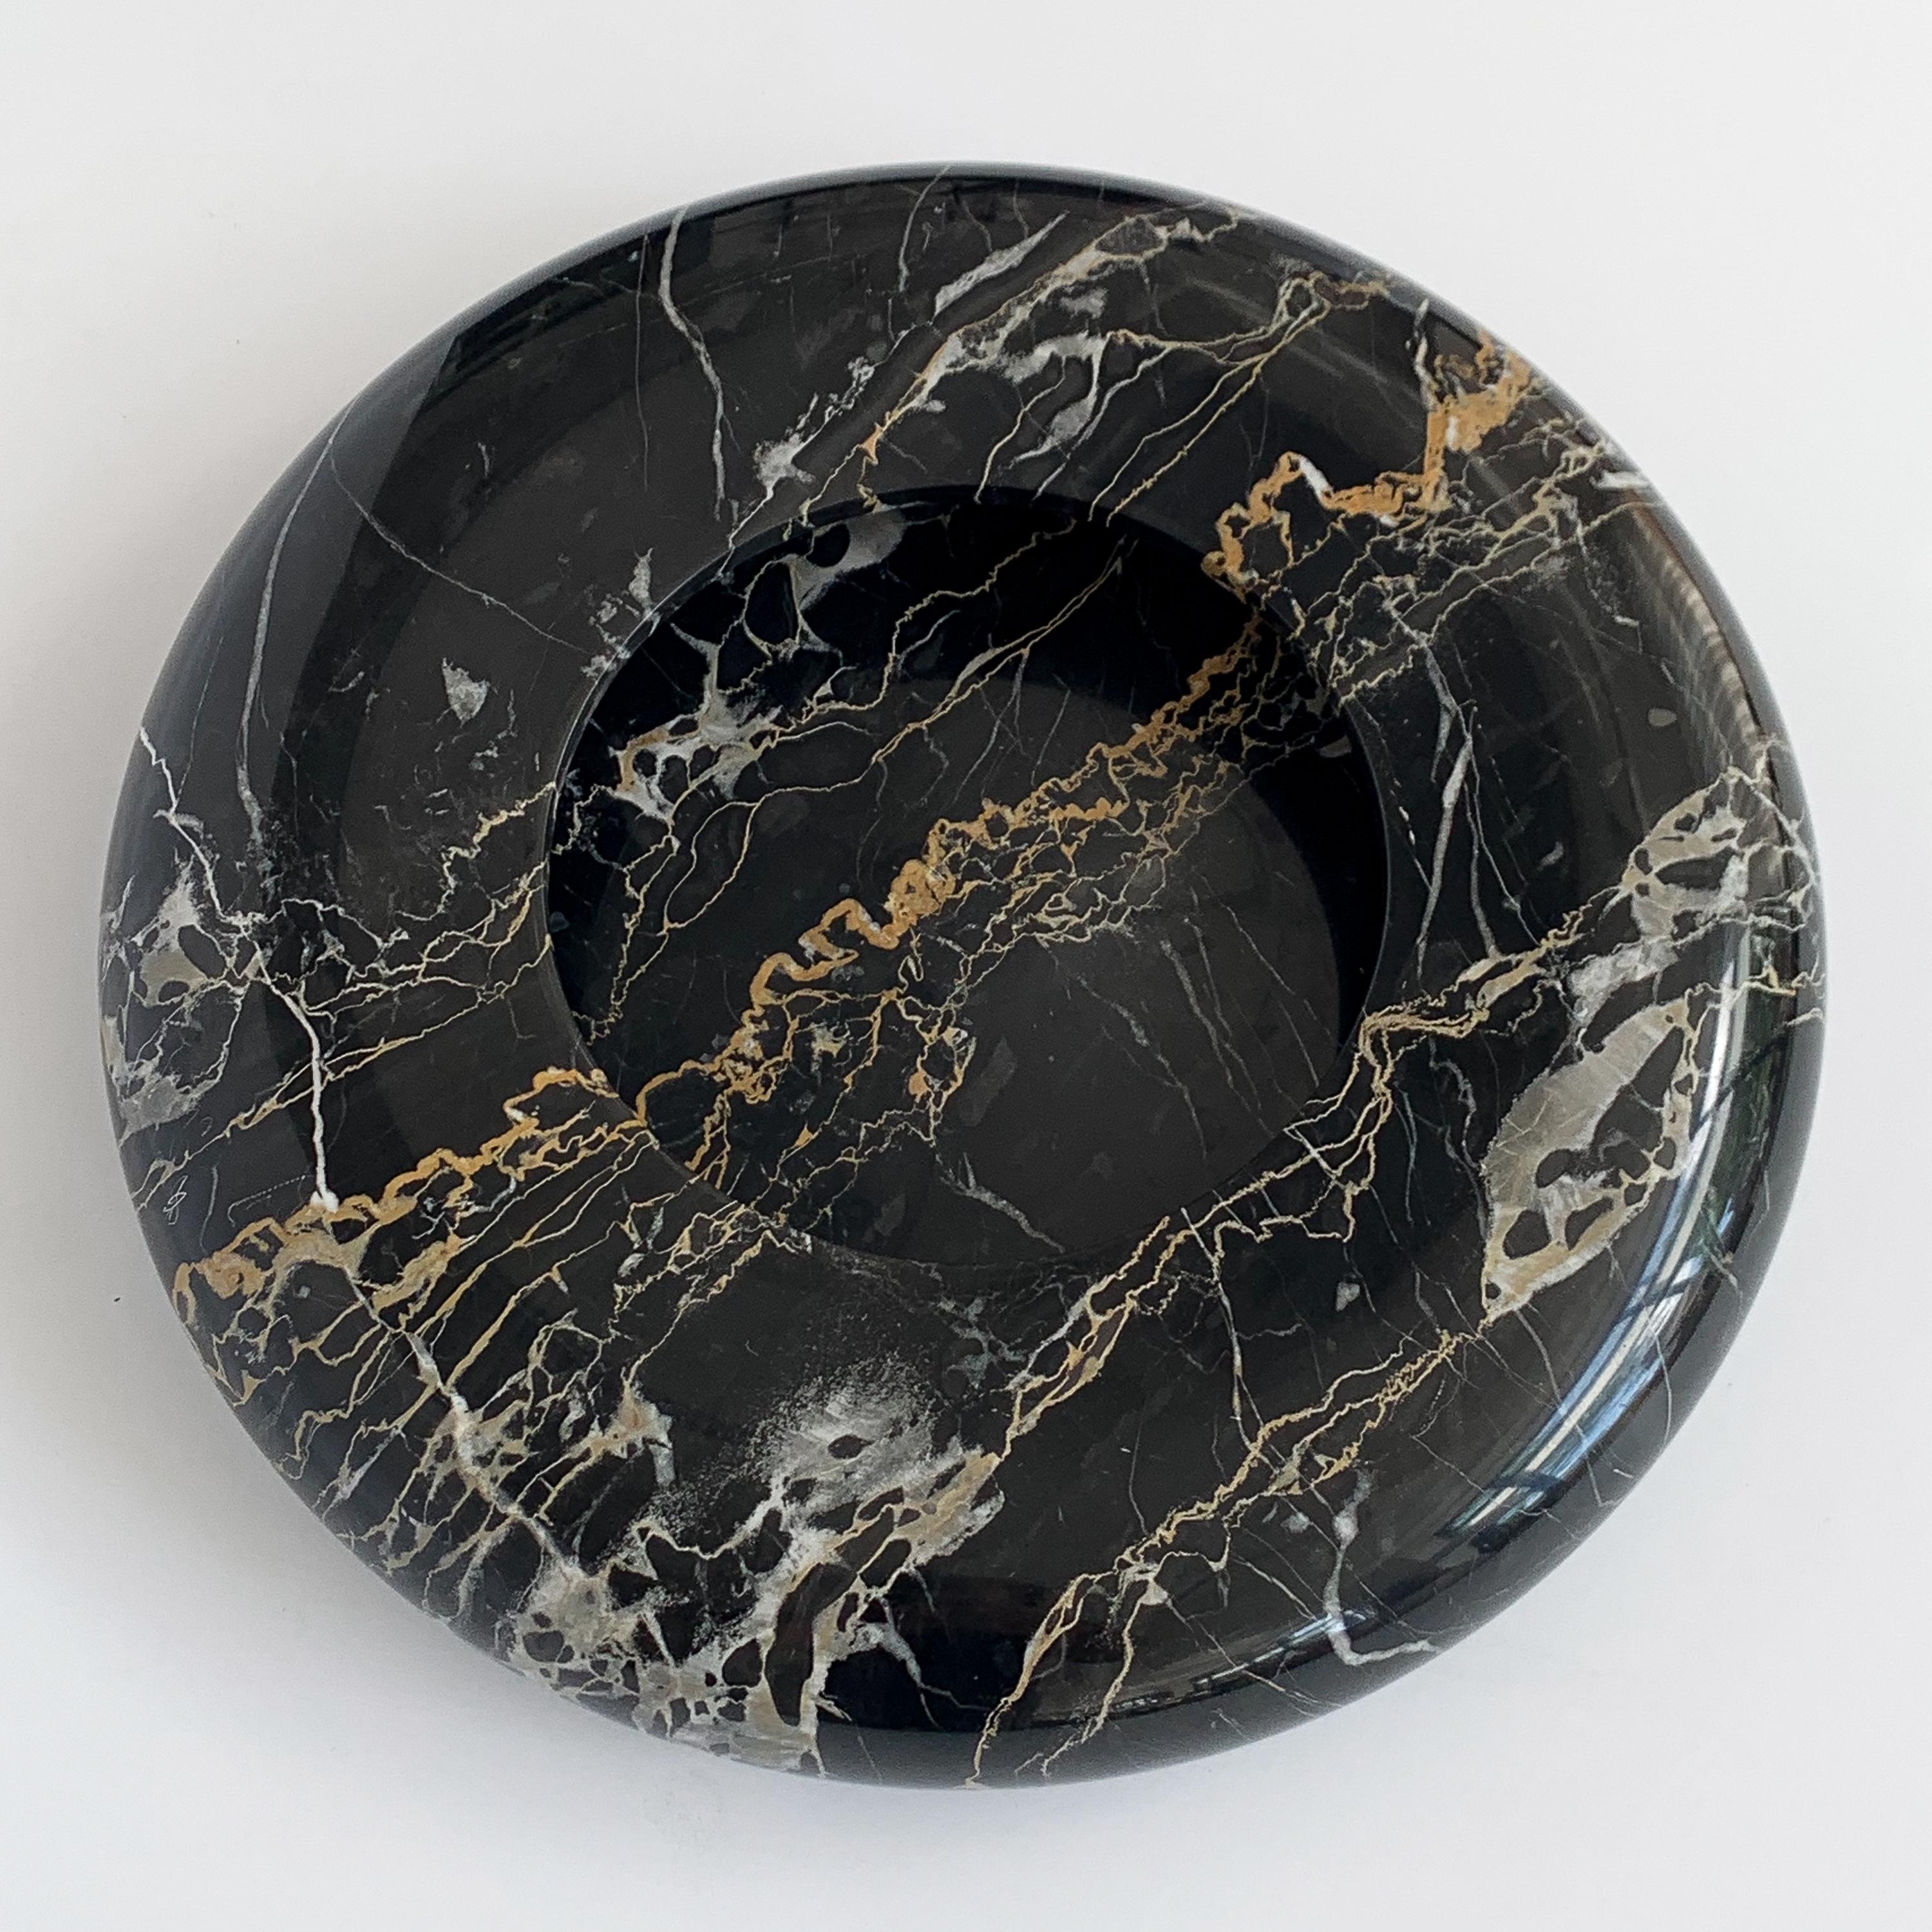 Italian Nero Portoro marble bowl by Sergio Asti for Up & Up, circa 1970s. Black marble with stunning gold, gray and white veining. 5.5